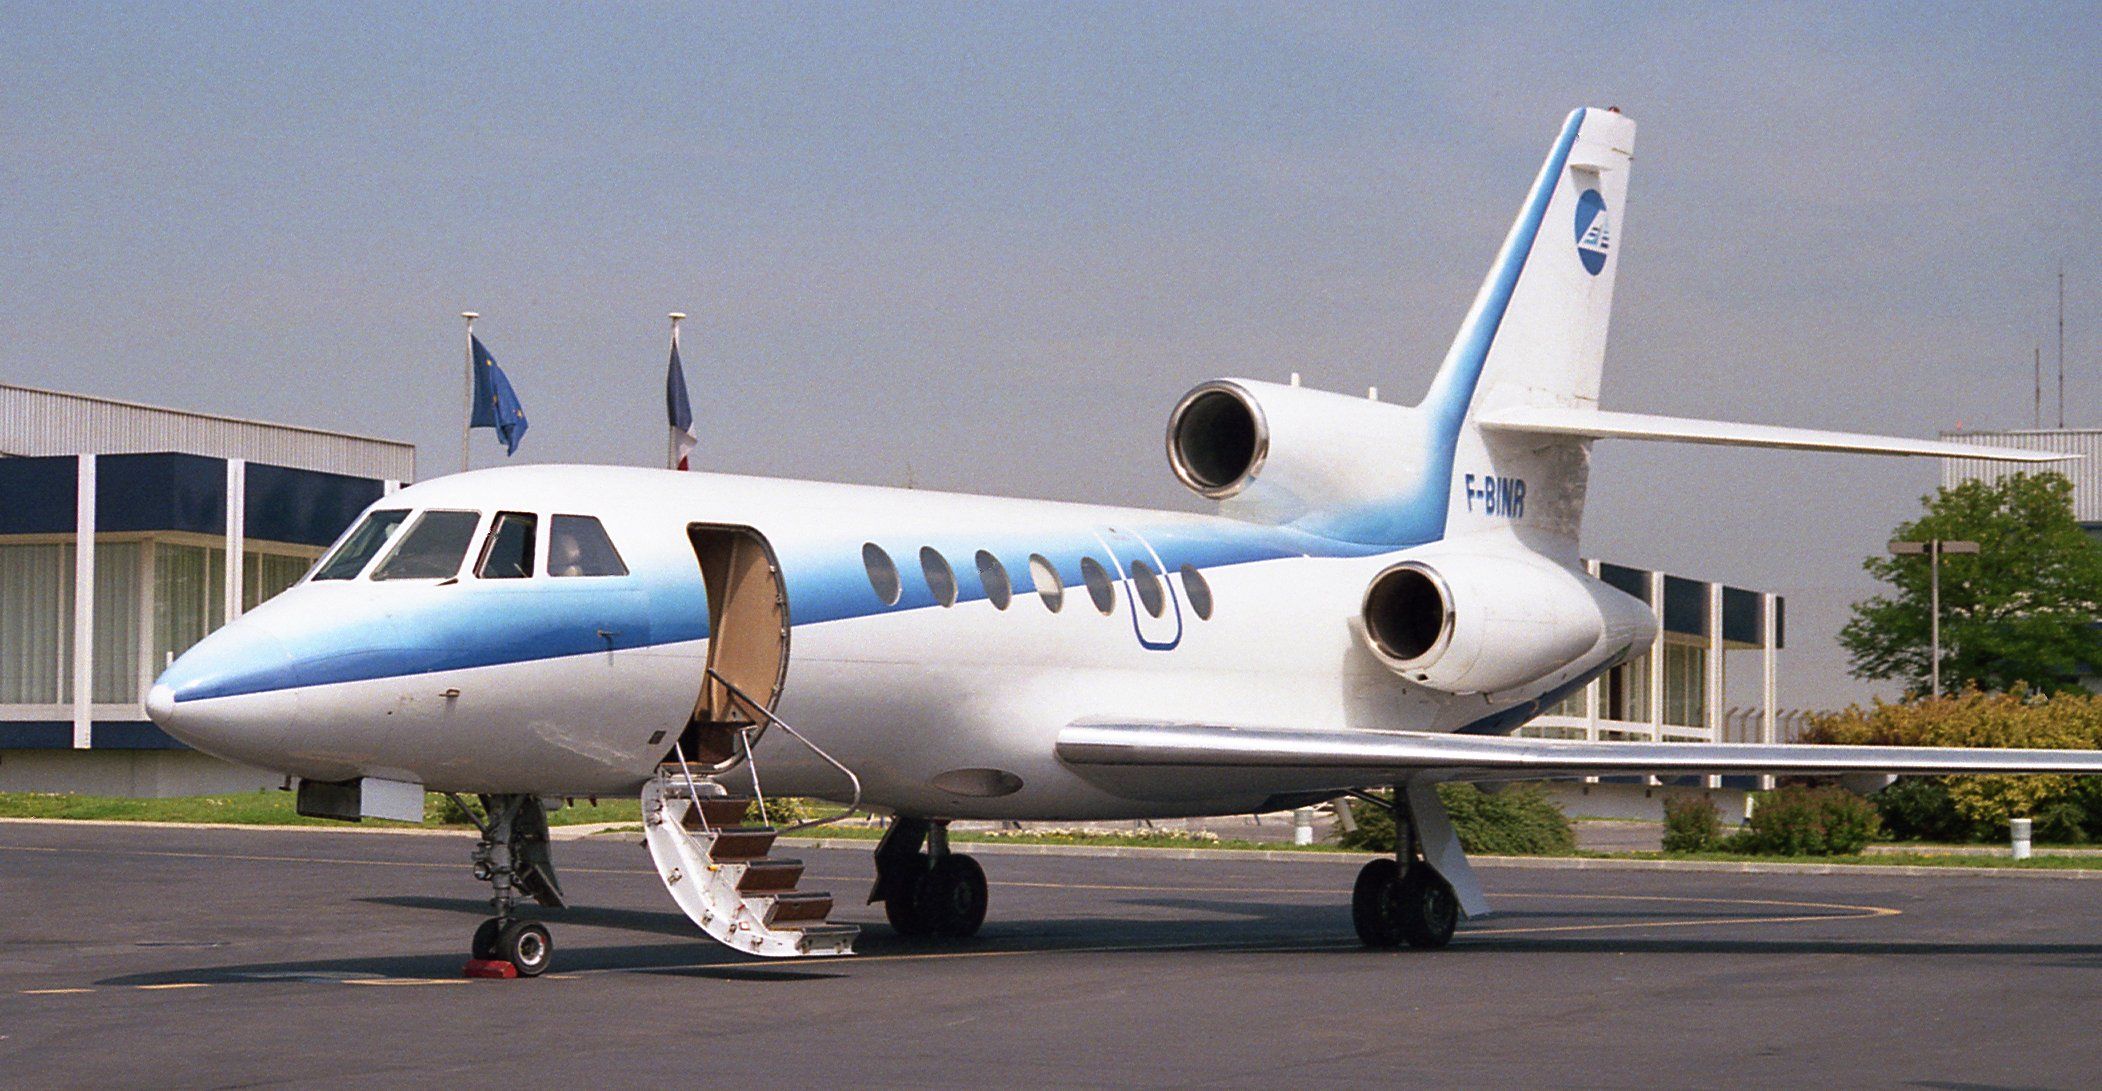 A Dassault Falcon 50 parked and ready for passengers to board.